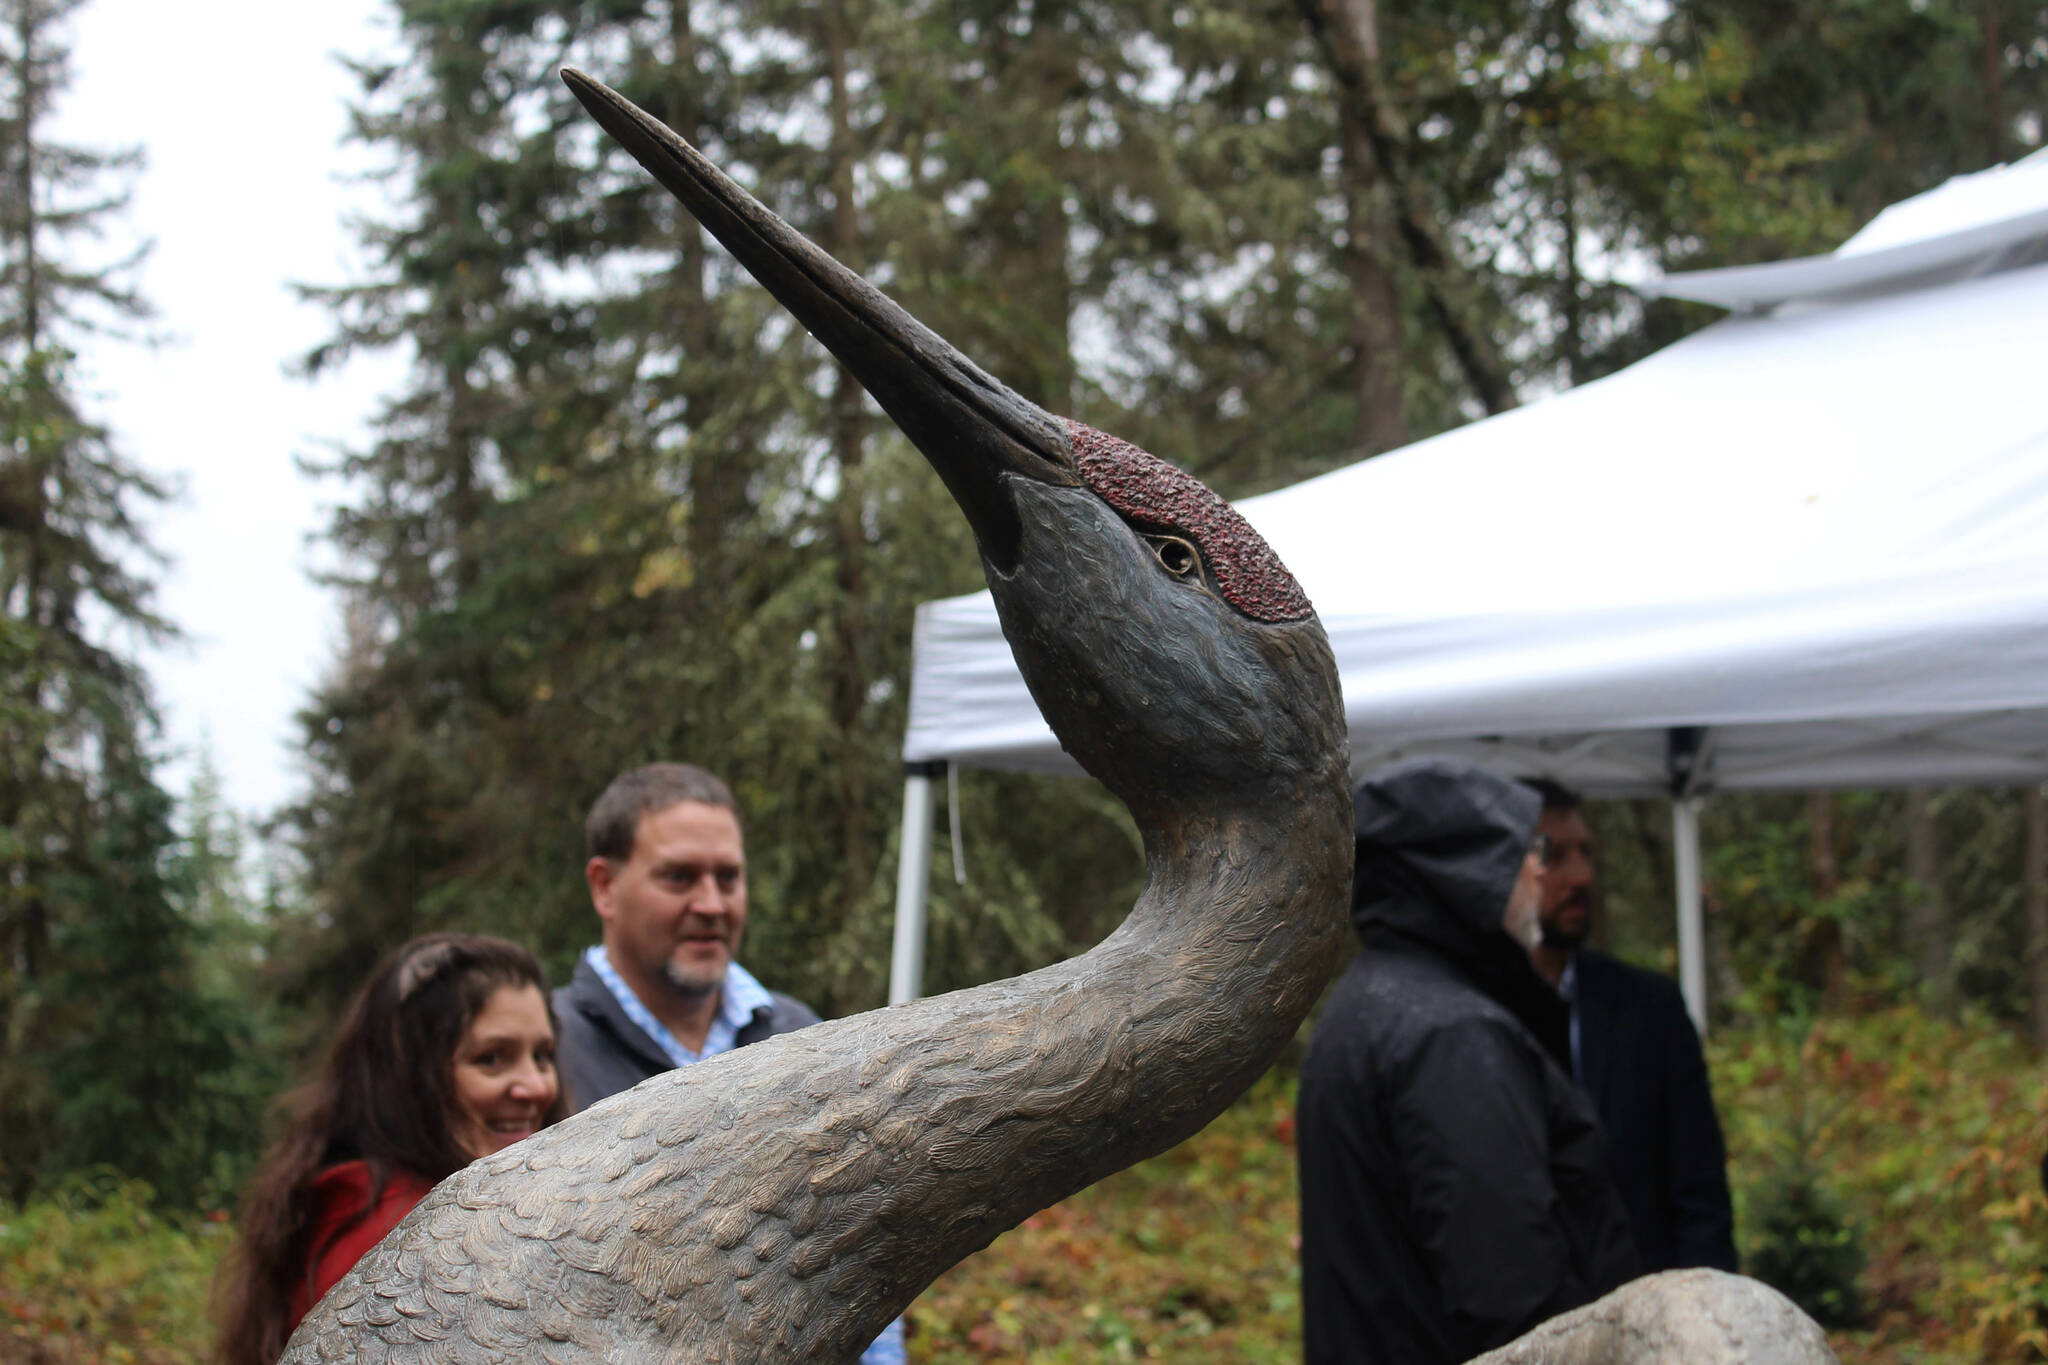 Visitors look at a peace crane statue unveiled as part of the grand opening and dedication of the Kenai Peninsula Peace Crane Garden Trails on Thursday, Sept. 8, 2022 in Soldotna, Alaska. (Ashlyn O’Hara/Peninsula Clarion)